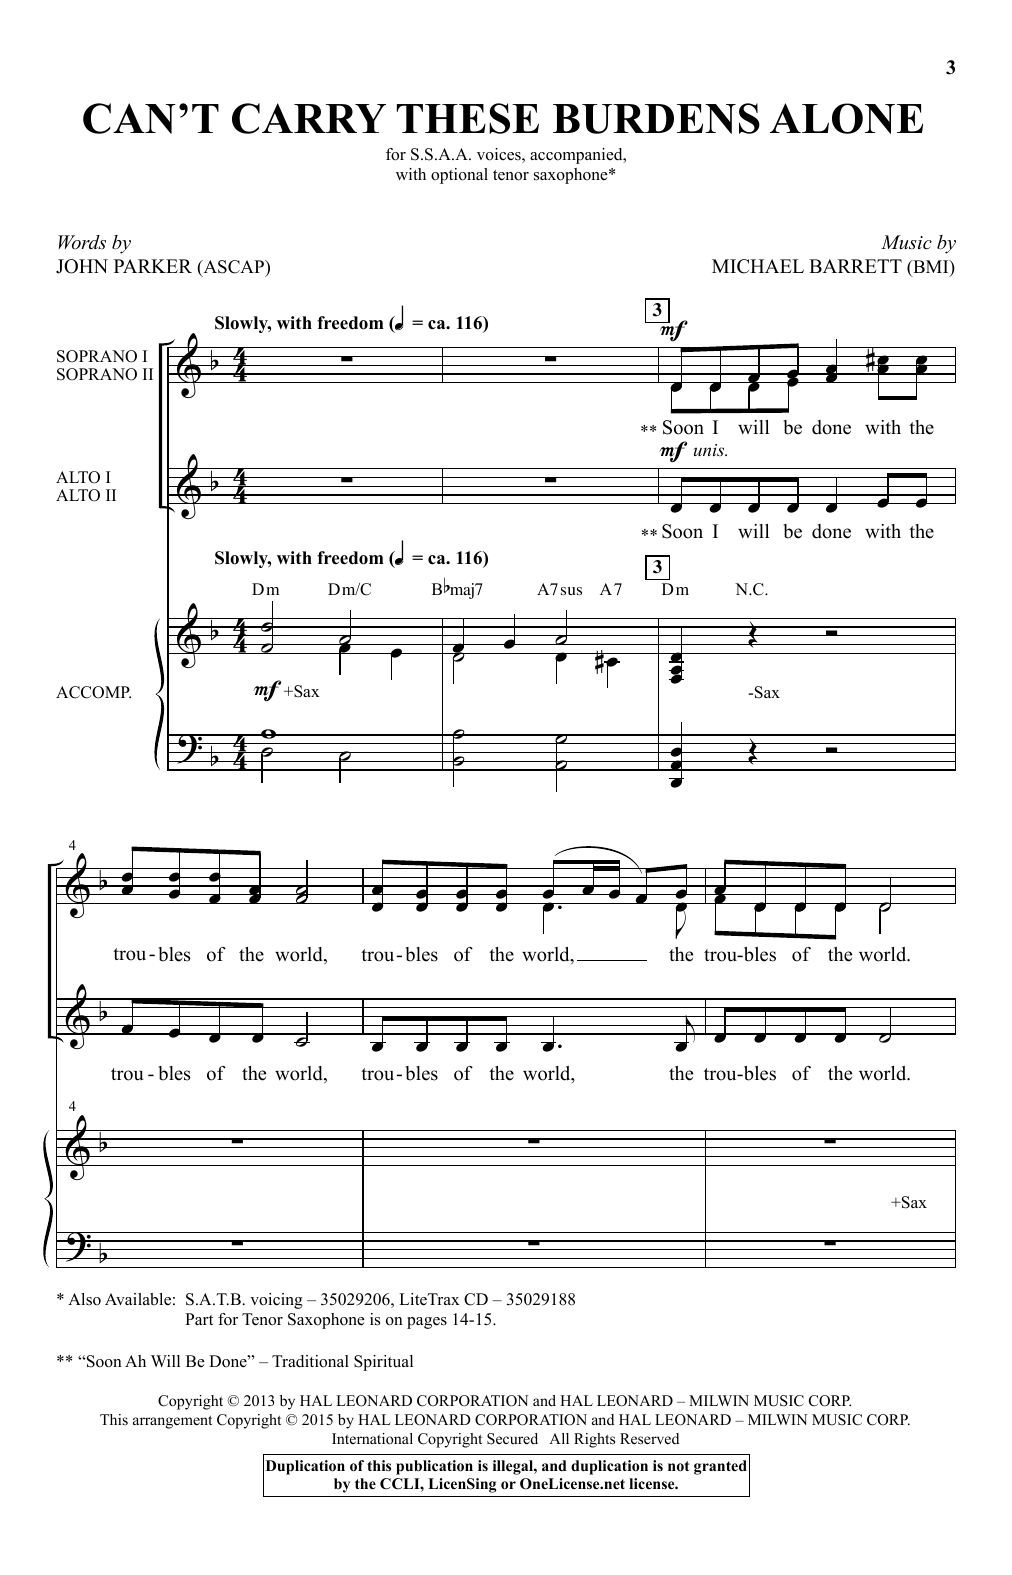 Download Michael Barrett Can't Carry These Burdens Alone Sheet Music